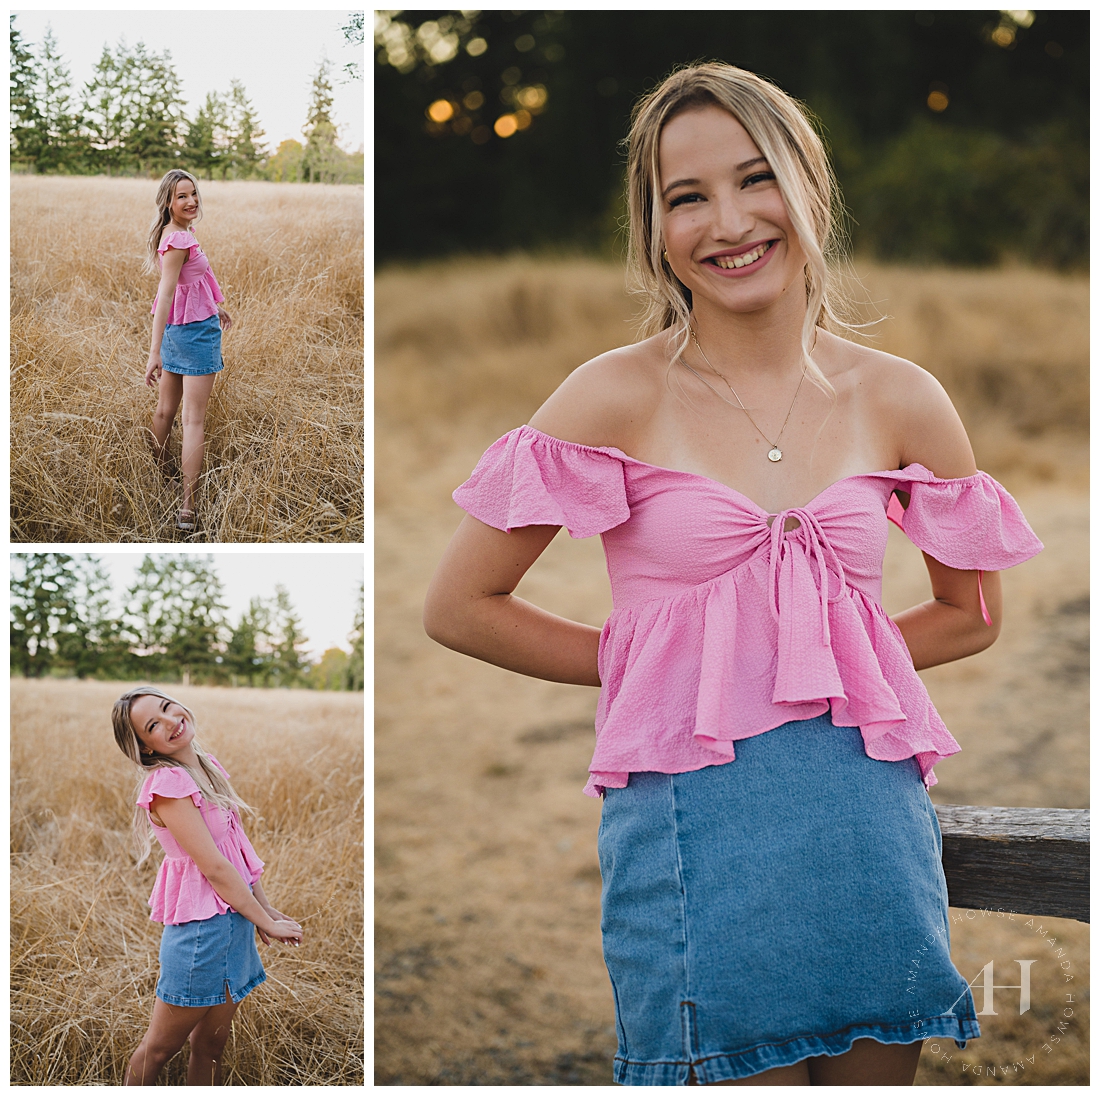 Cute, Rustic Senior Portraits in Grass Field | Photographed by the Best Tacoma, Washington Senior Photographer Amanda Howse Photography